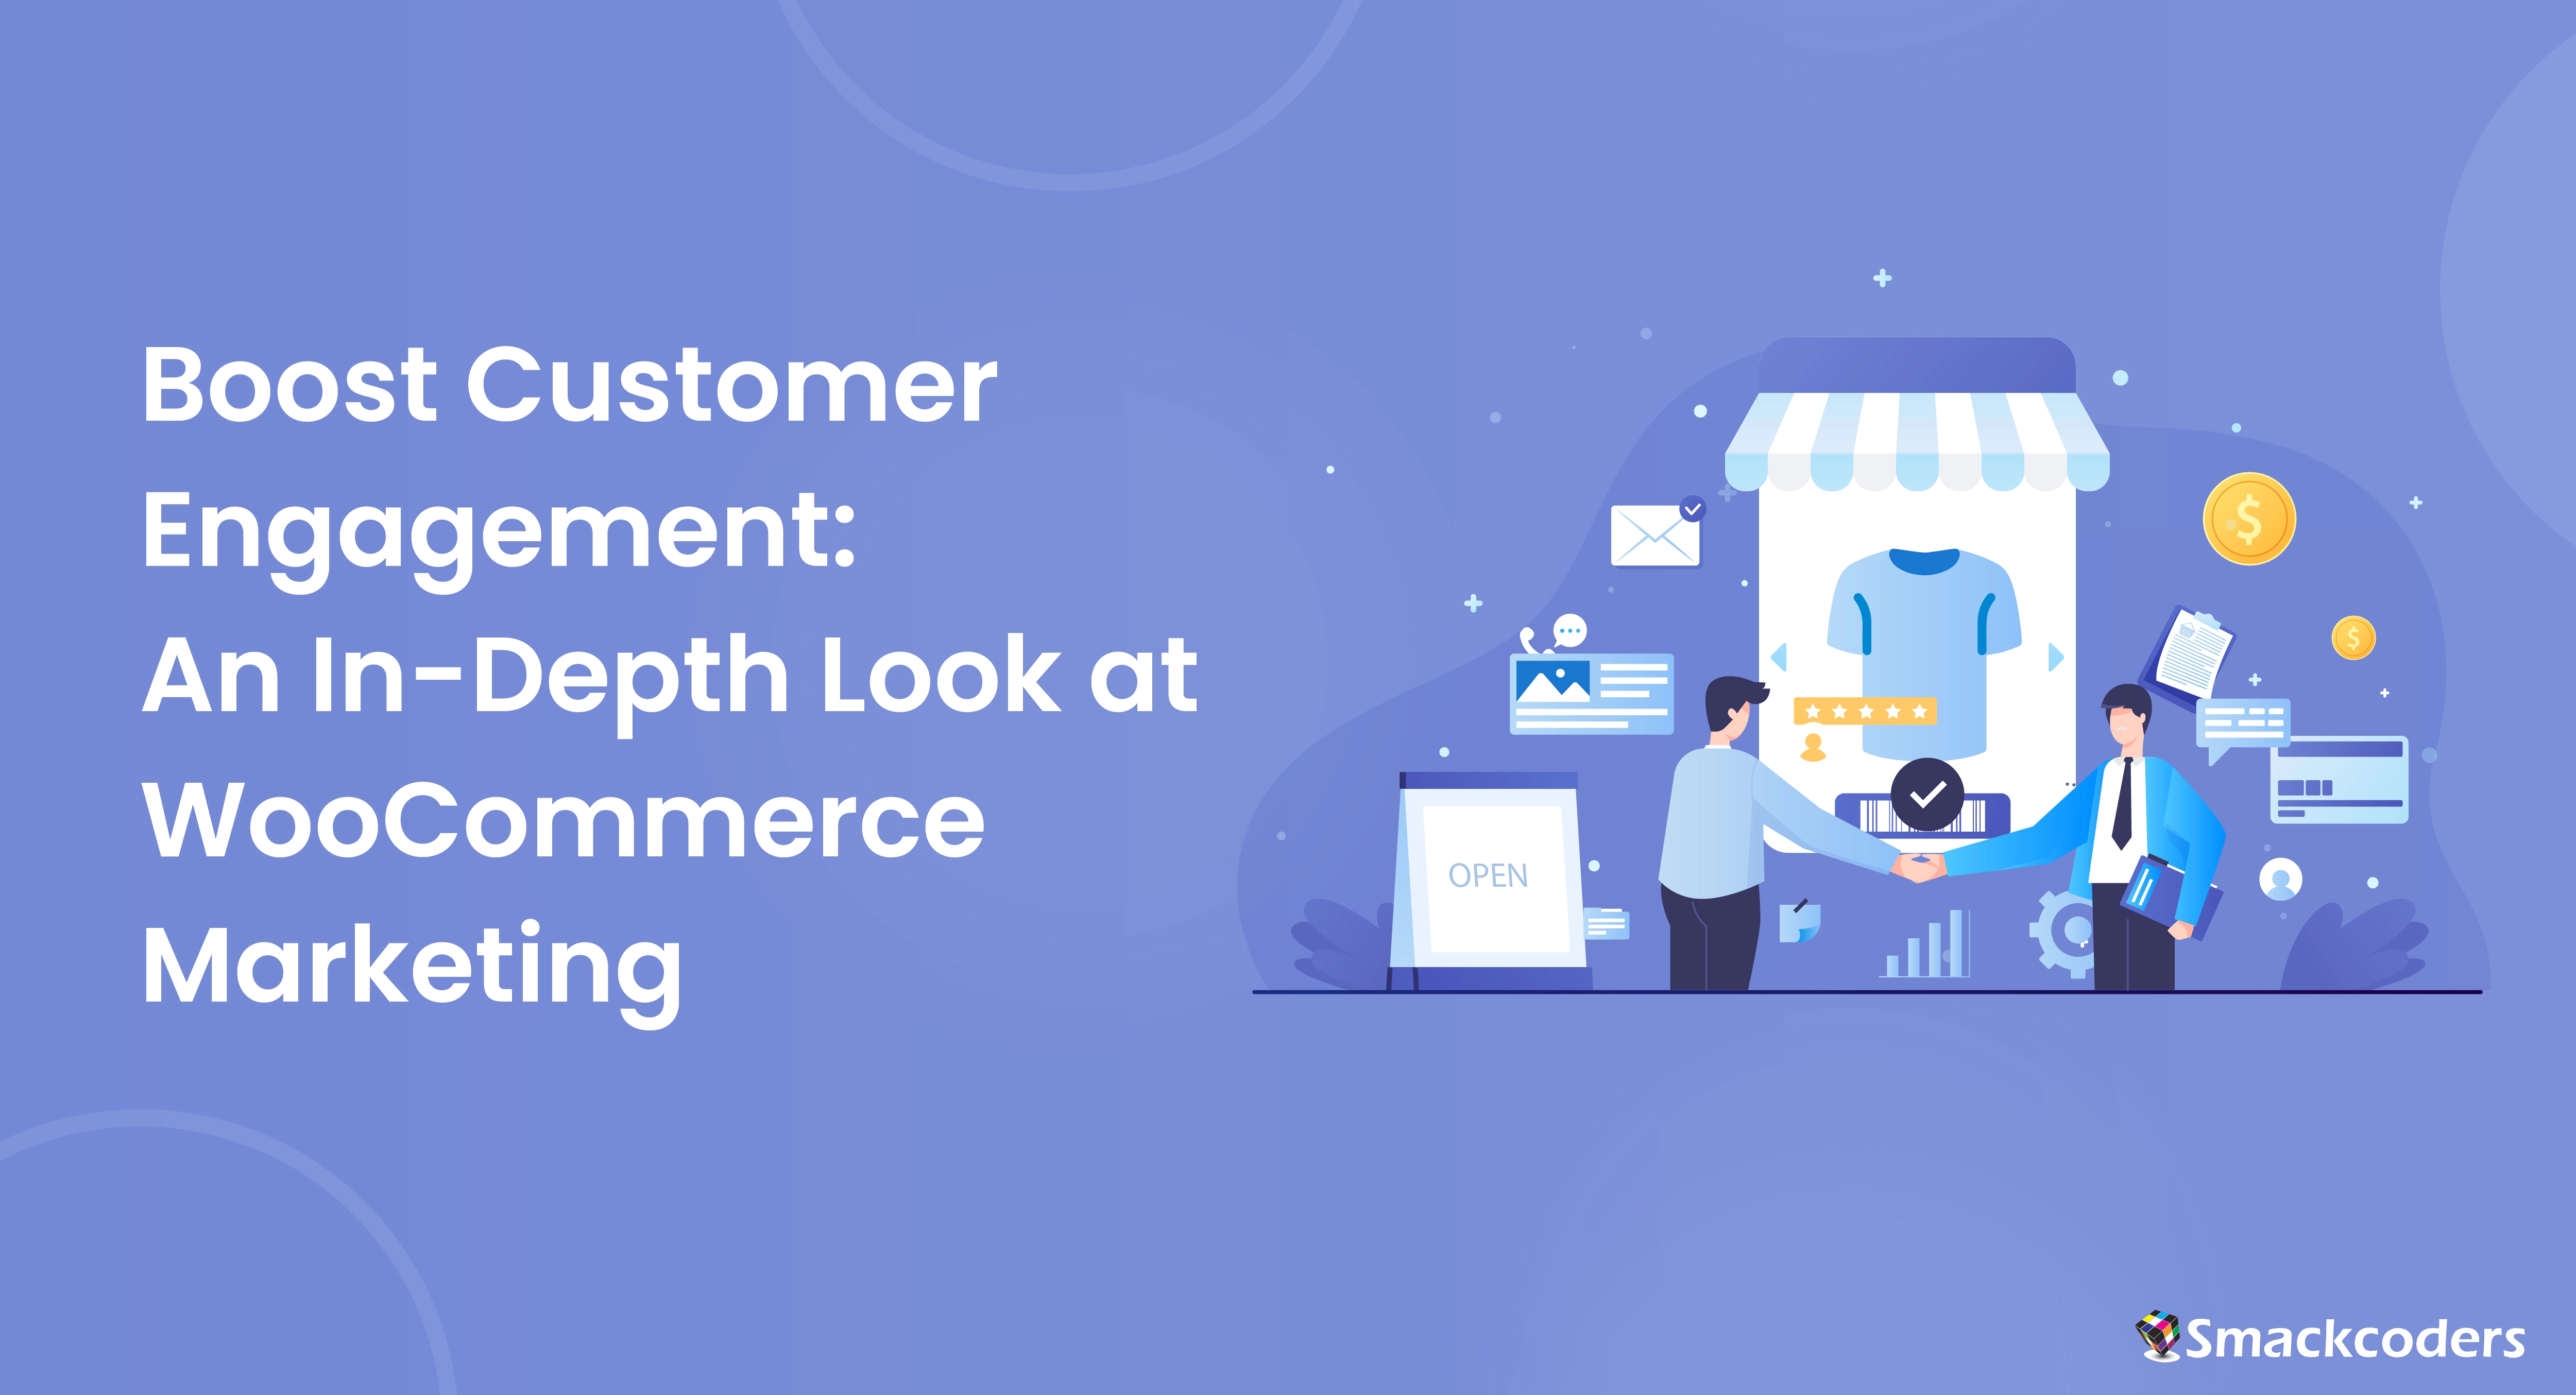 Boost Customer Engagement: An In-Depth Look at WooCommerce Marketing